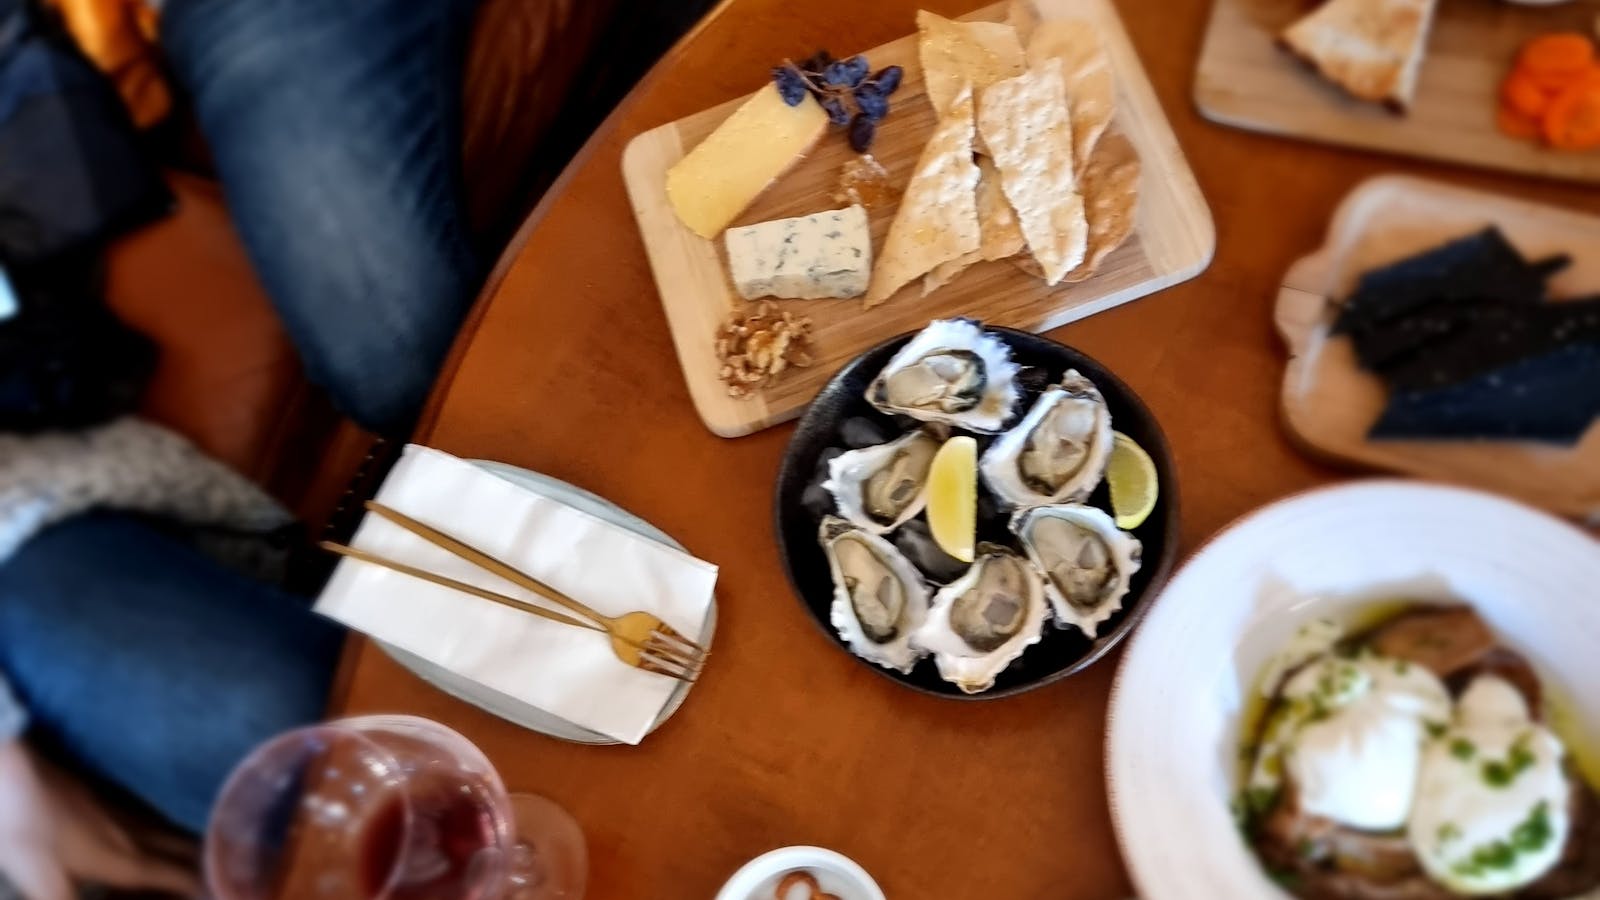 Enjoy Shoalhaven oysters, cheese platters and various seasonal tapas